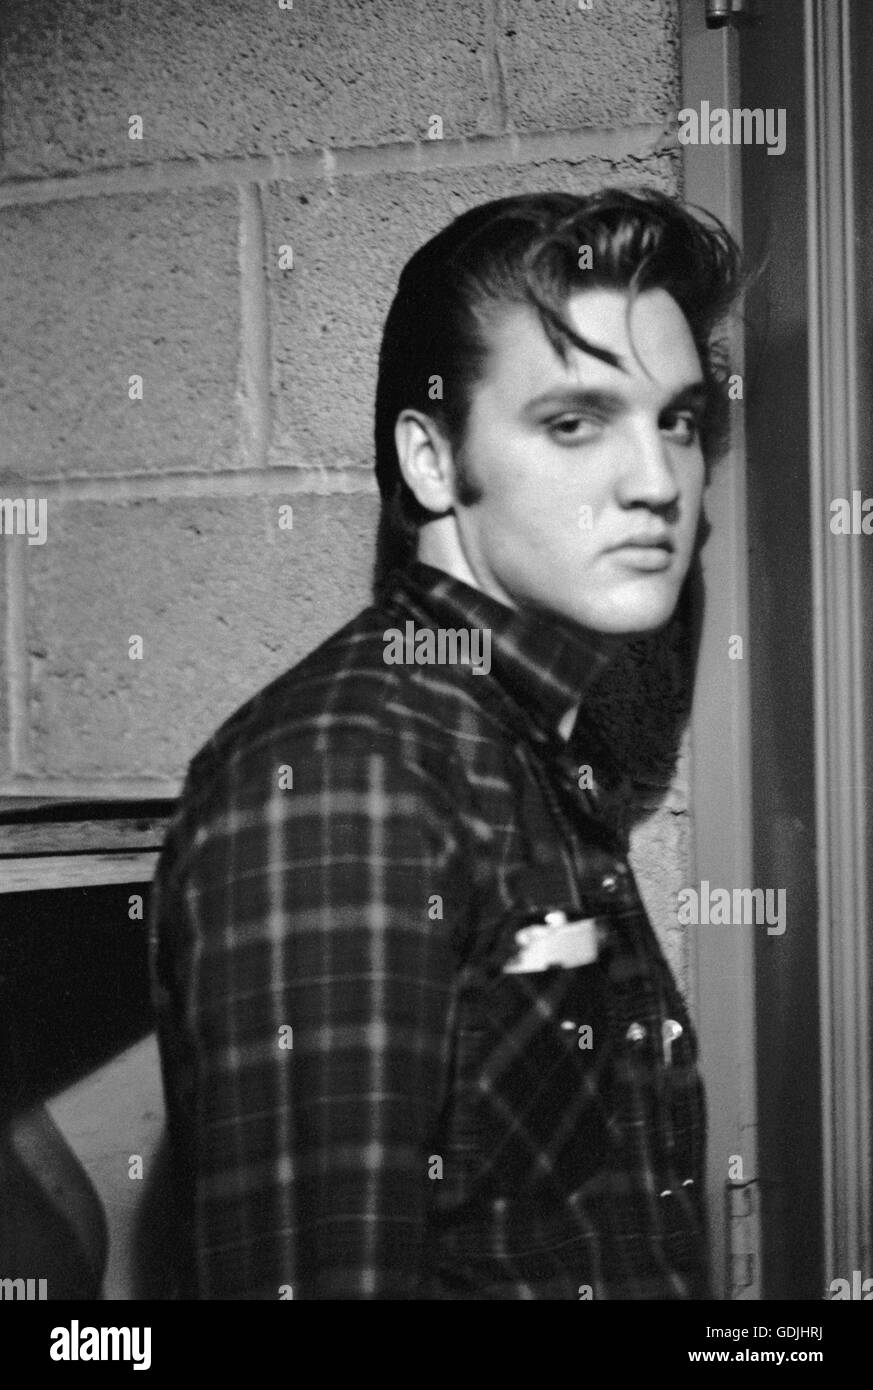 Elvis Presley, between performances, backstage at the University of Dayton Fieldhouse, May 27, 1956. Stock Photo